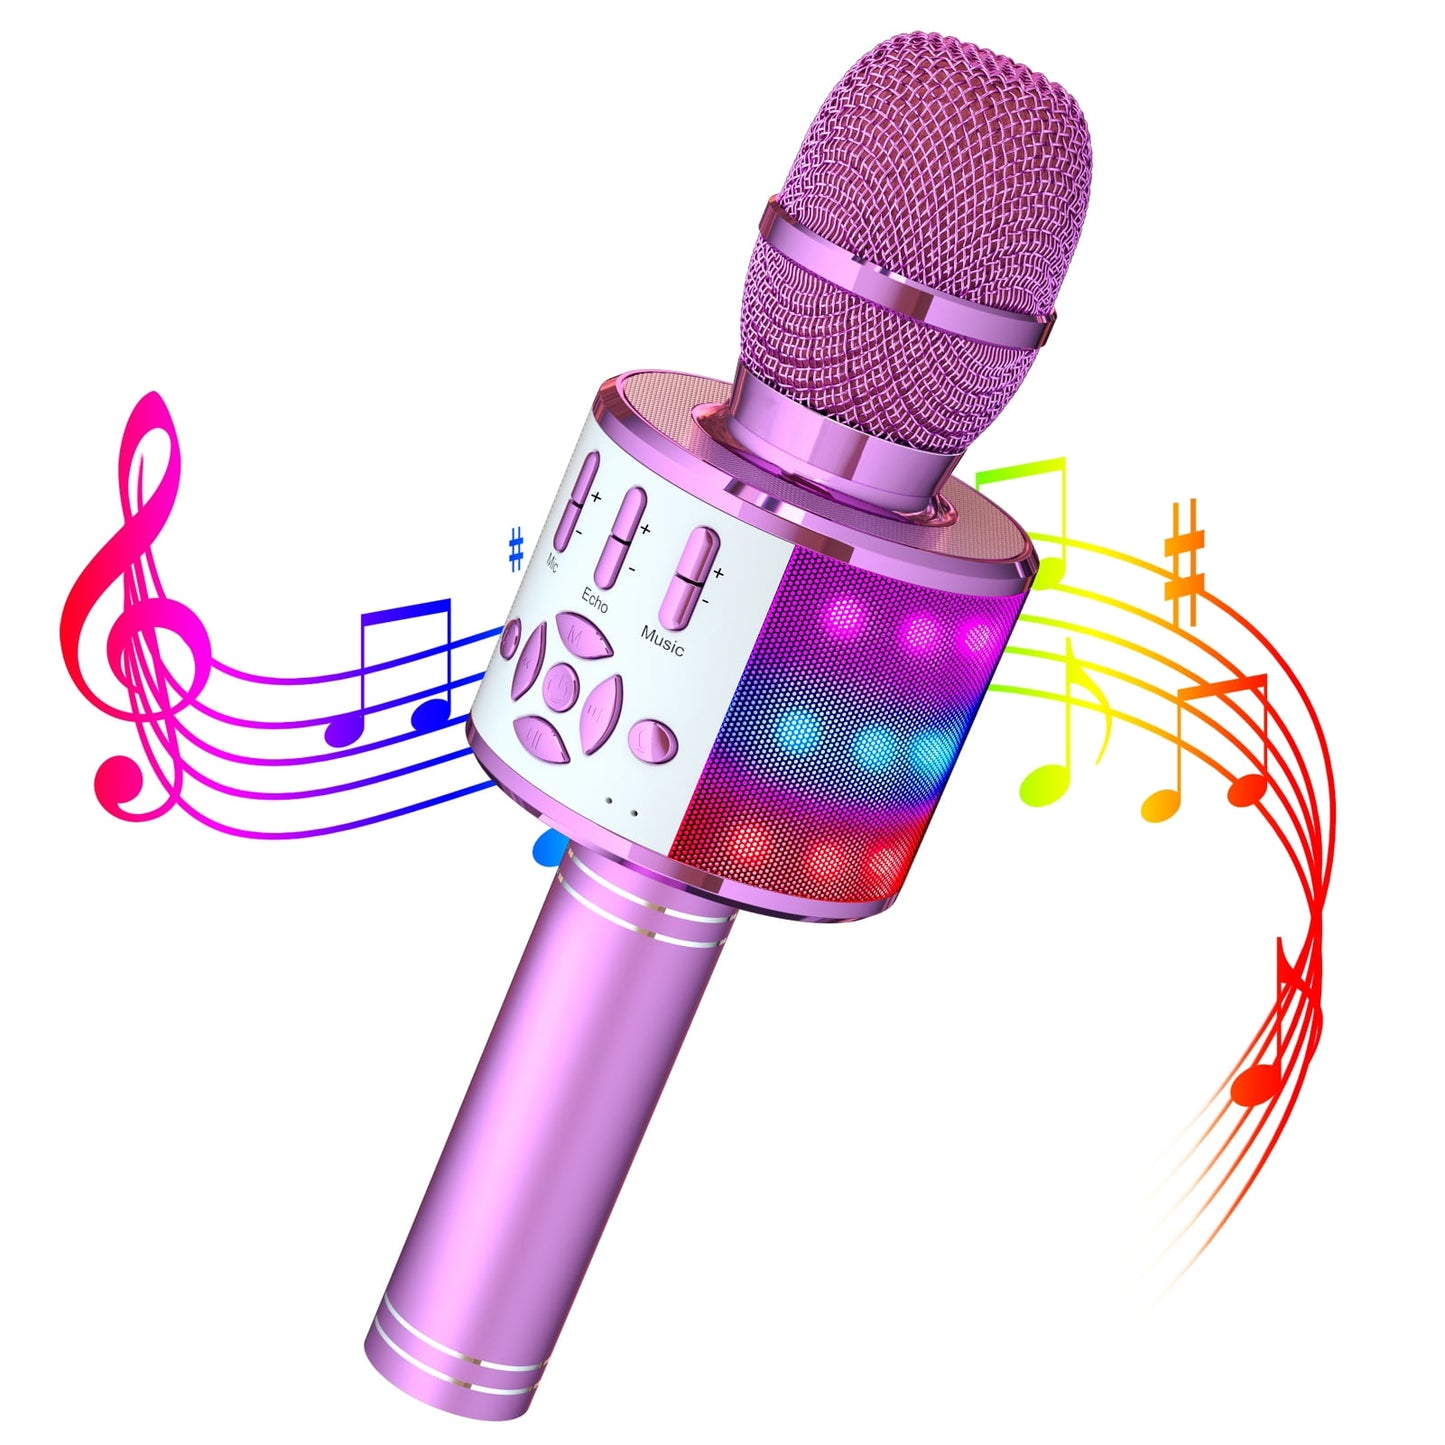 BONAOK Karaoke Microphone For Kids Adults, Wireless Bluetooth Microphone for Singing, Portable Karaoke Machine Handheld with LED Lights, Gift for Teens Girl Boys Adults Birthday Party(Rose Gold)